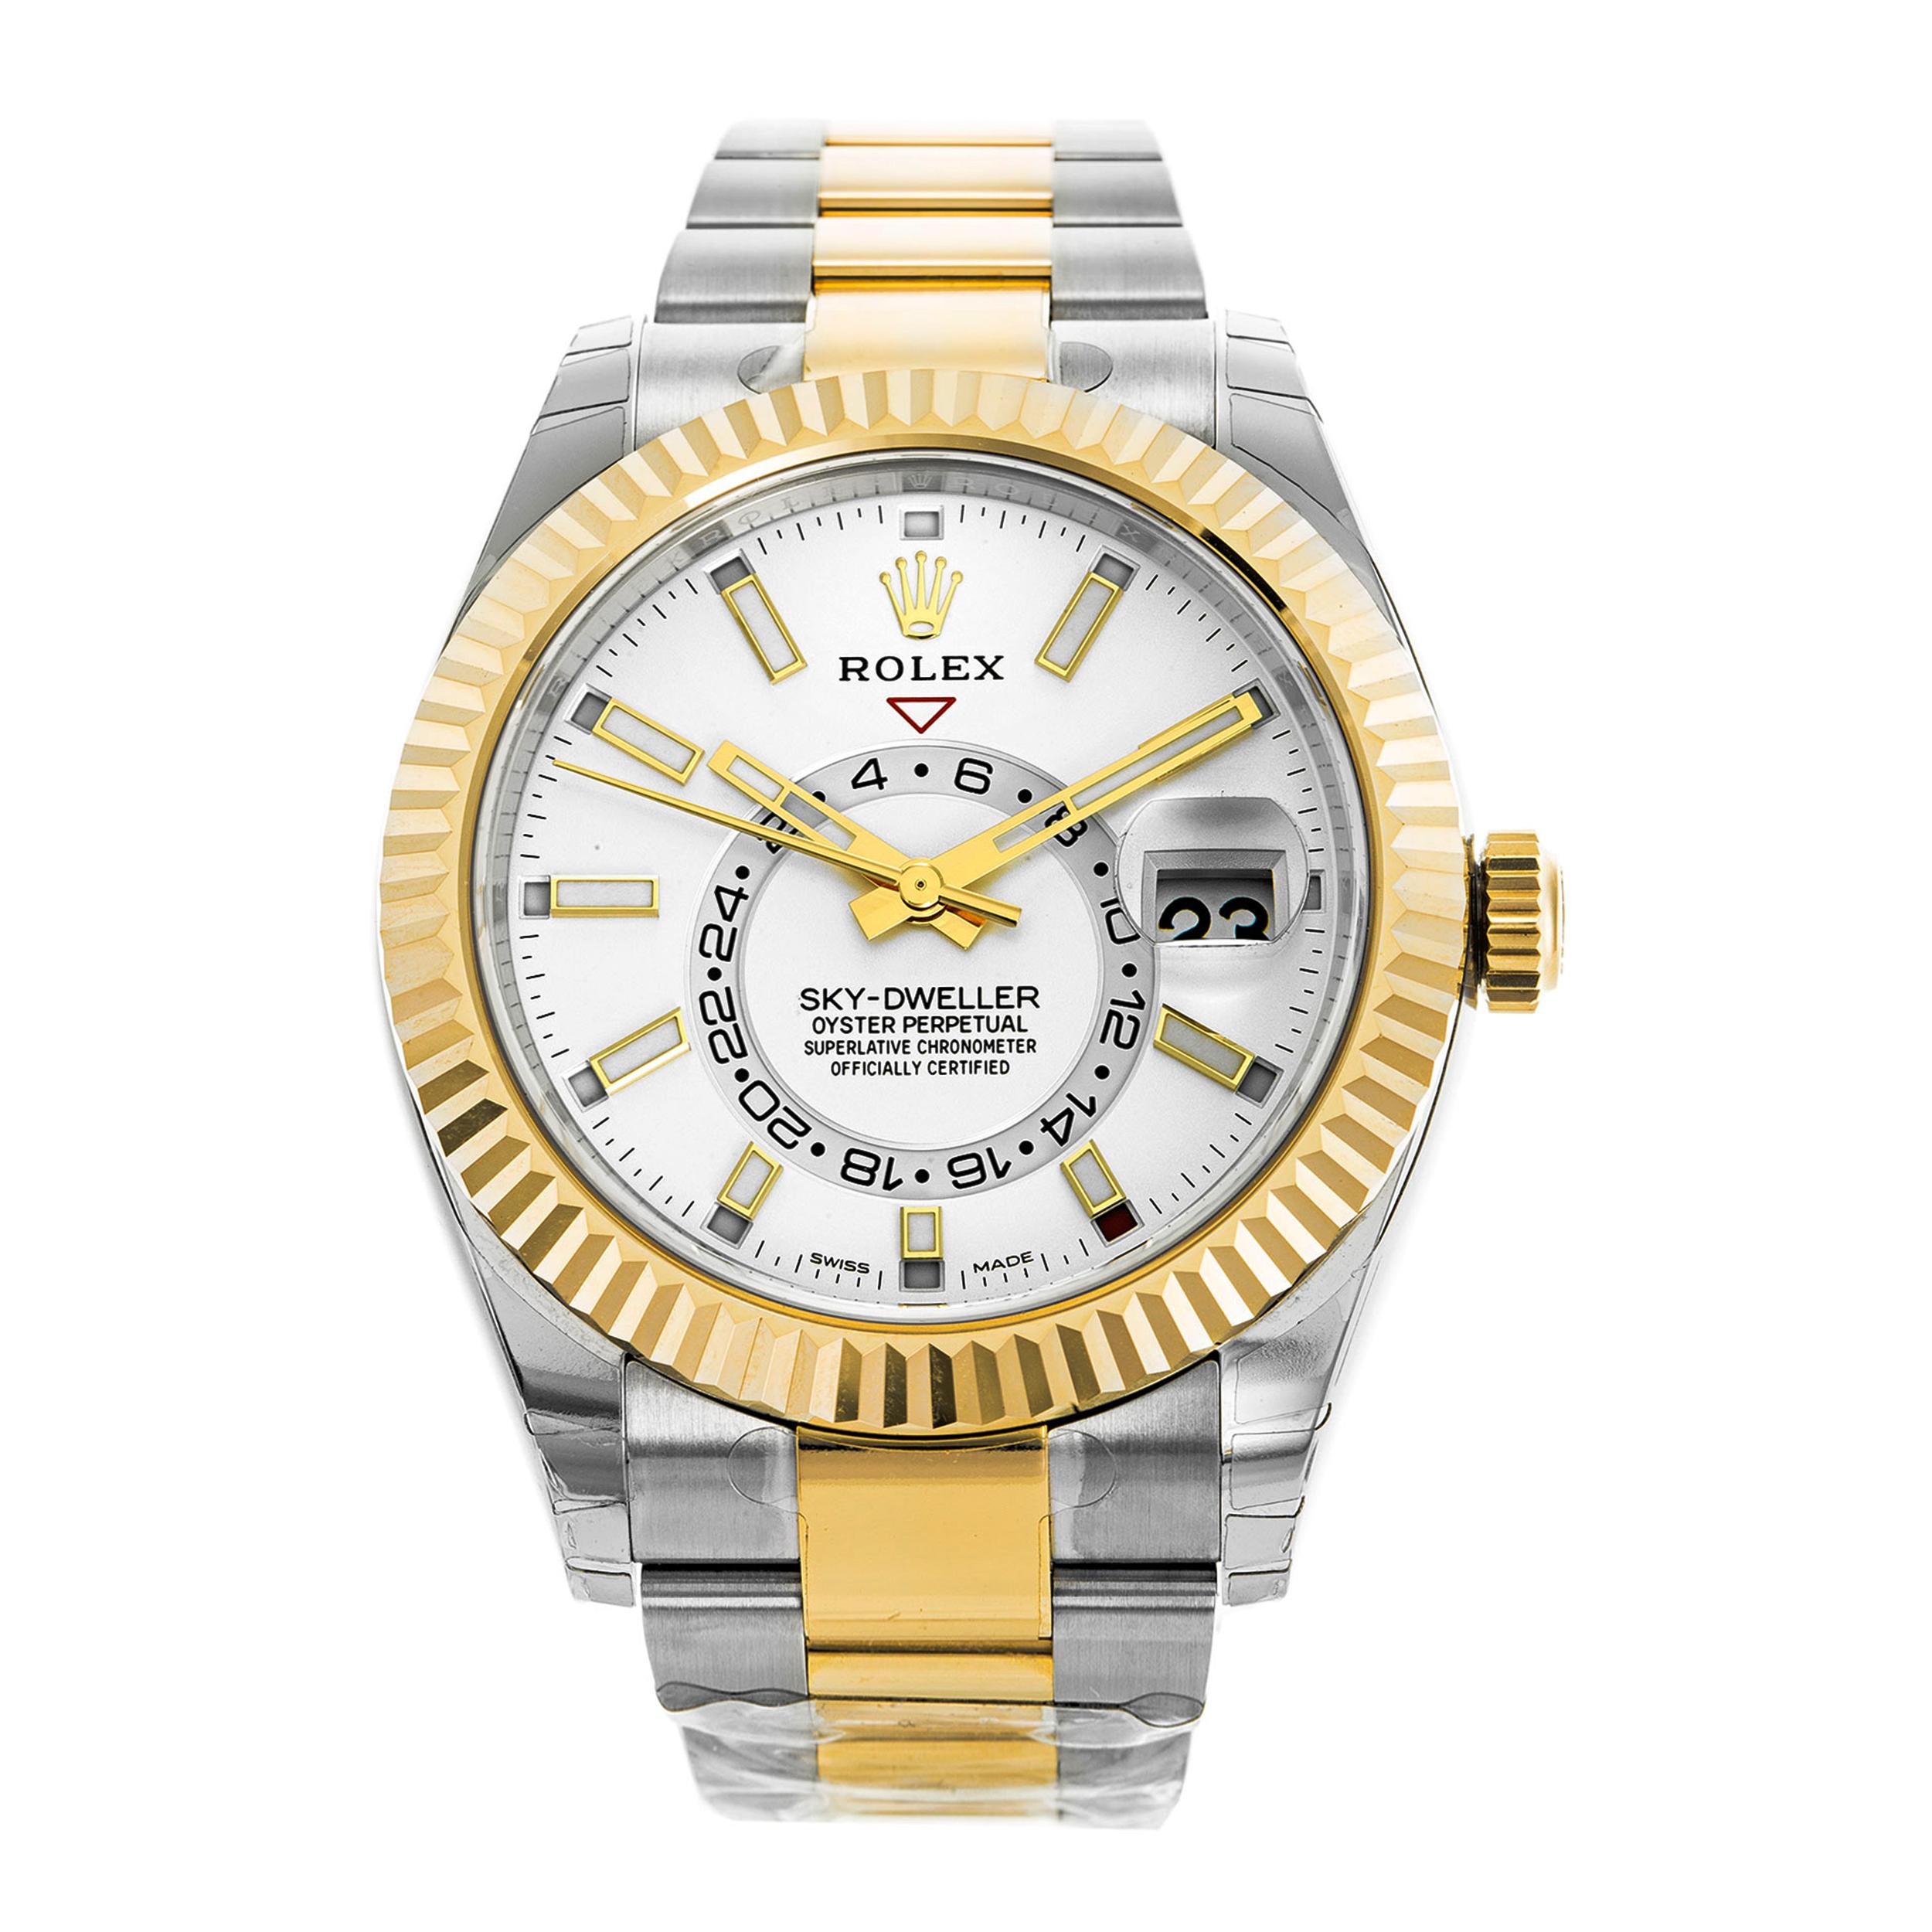 This brand new Rolex Sky-Dweller 326933  is a beautiful men's timepiece that is powered by an automatic movement which is cased in a stainless steel case. It has a round shape face, date dial and has hand sticks style markers. It is completed with a